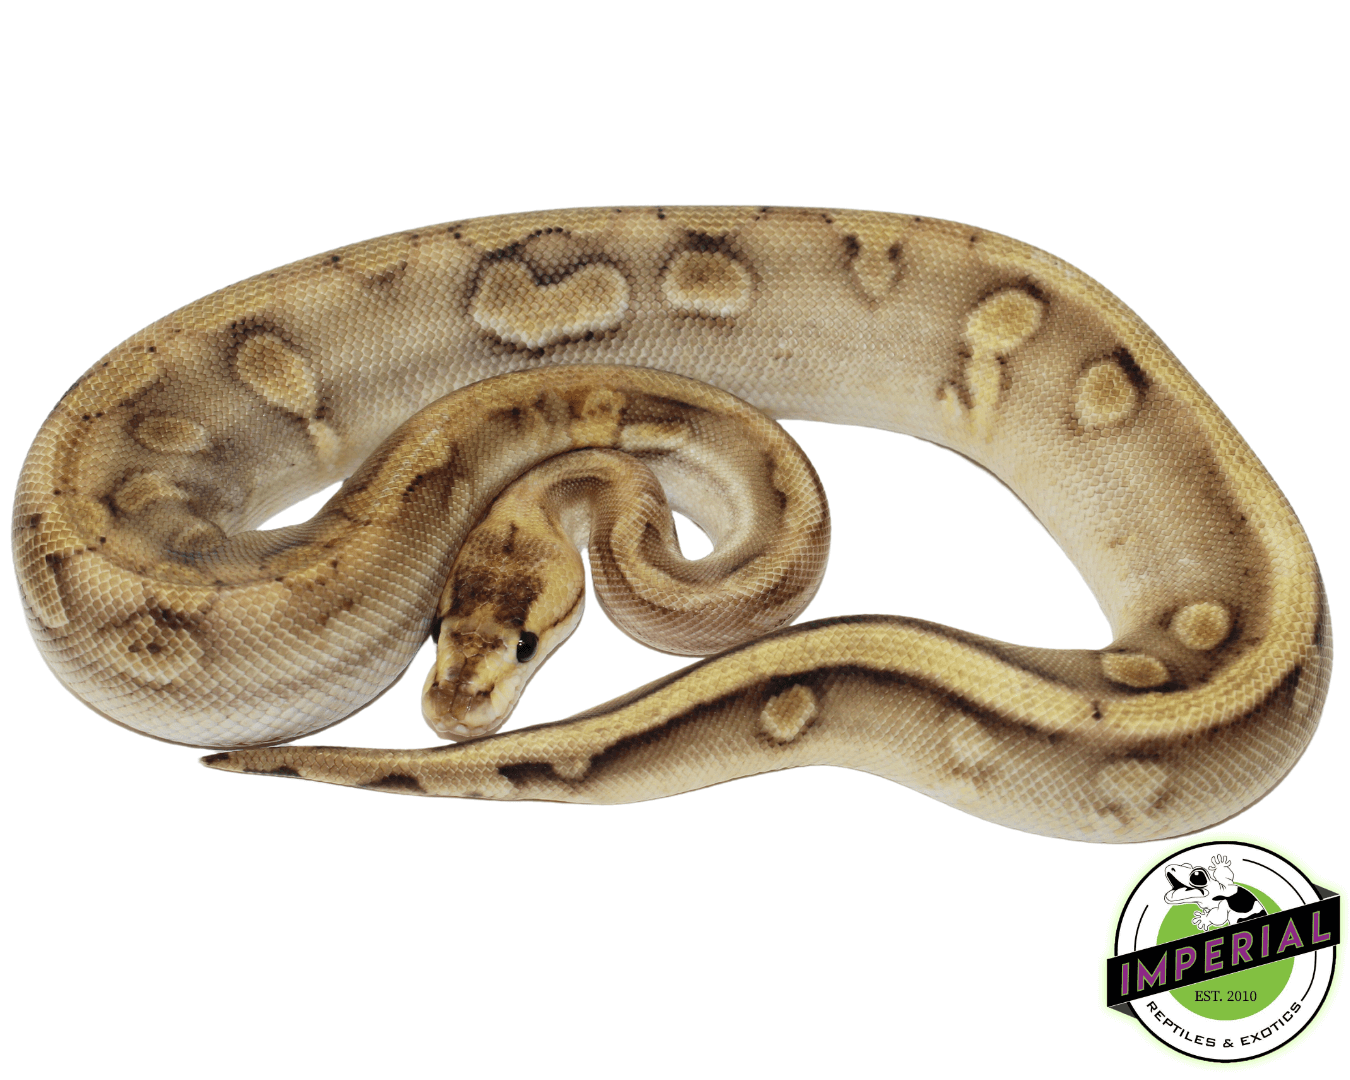 Pastel Enchi Champagne ball python for sale, buy reptiles online